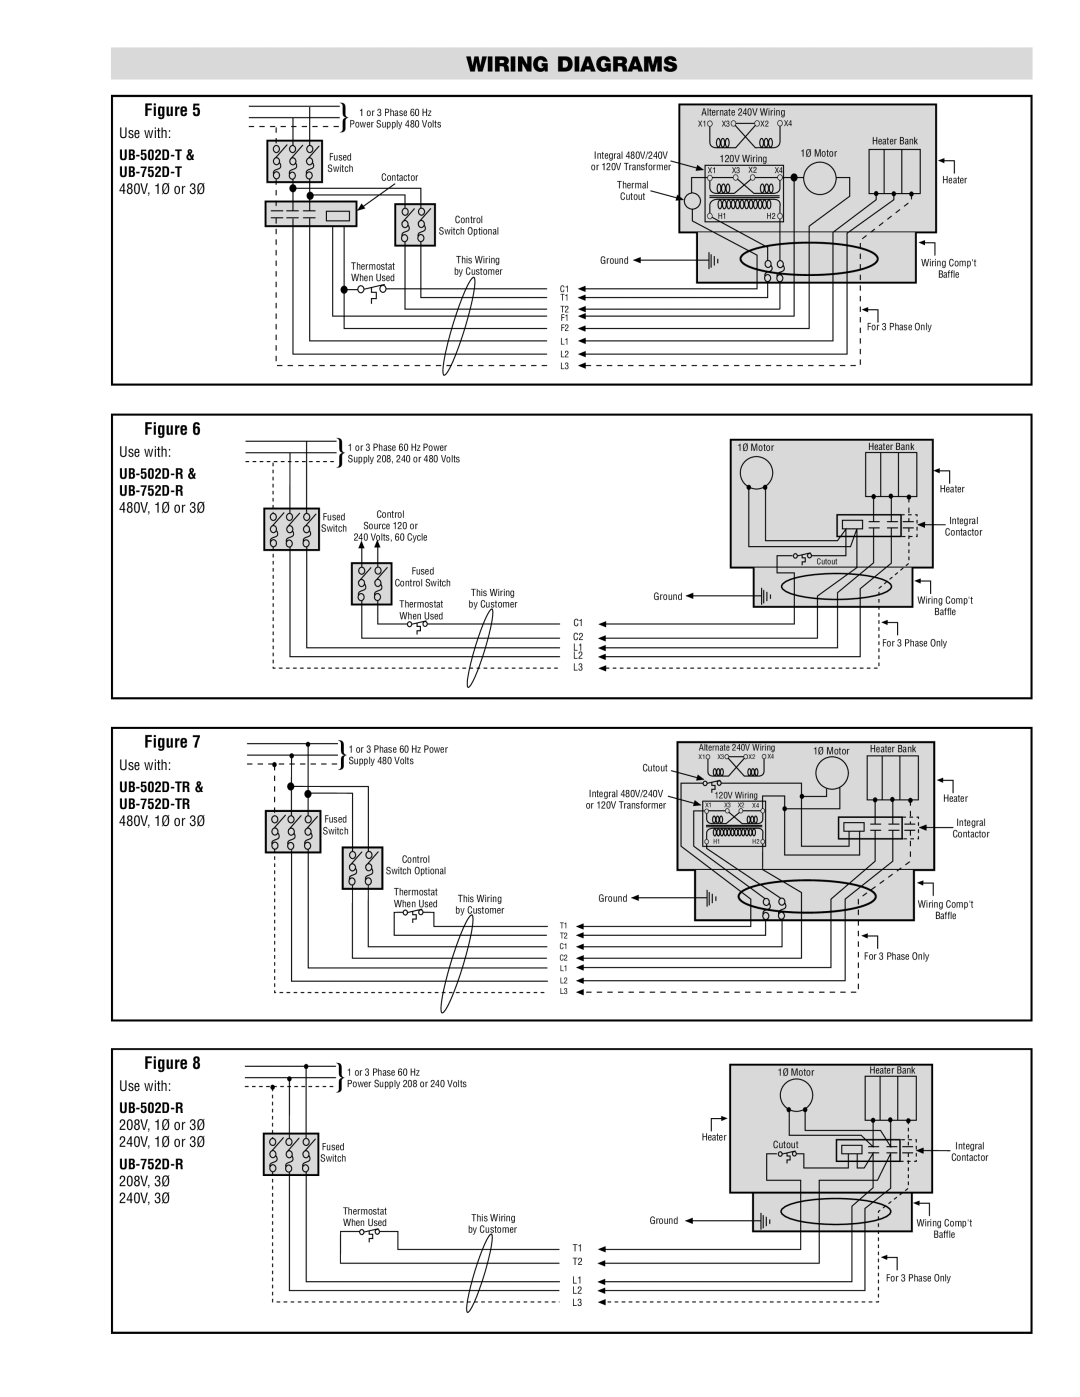 Chromalox specifications Wiring Diagrams, Use with, UB-502D-T, UB-752D-T, 480V, 1Ø or 3Ø, UB-752D-R 208V, 3Ø 240V, 3Ø 